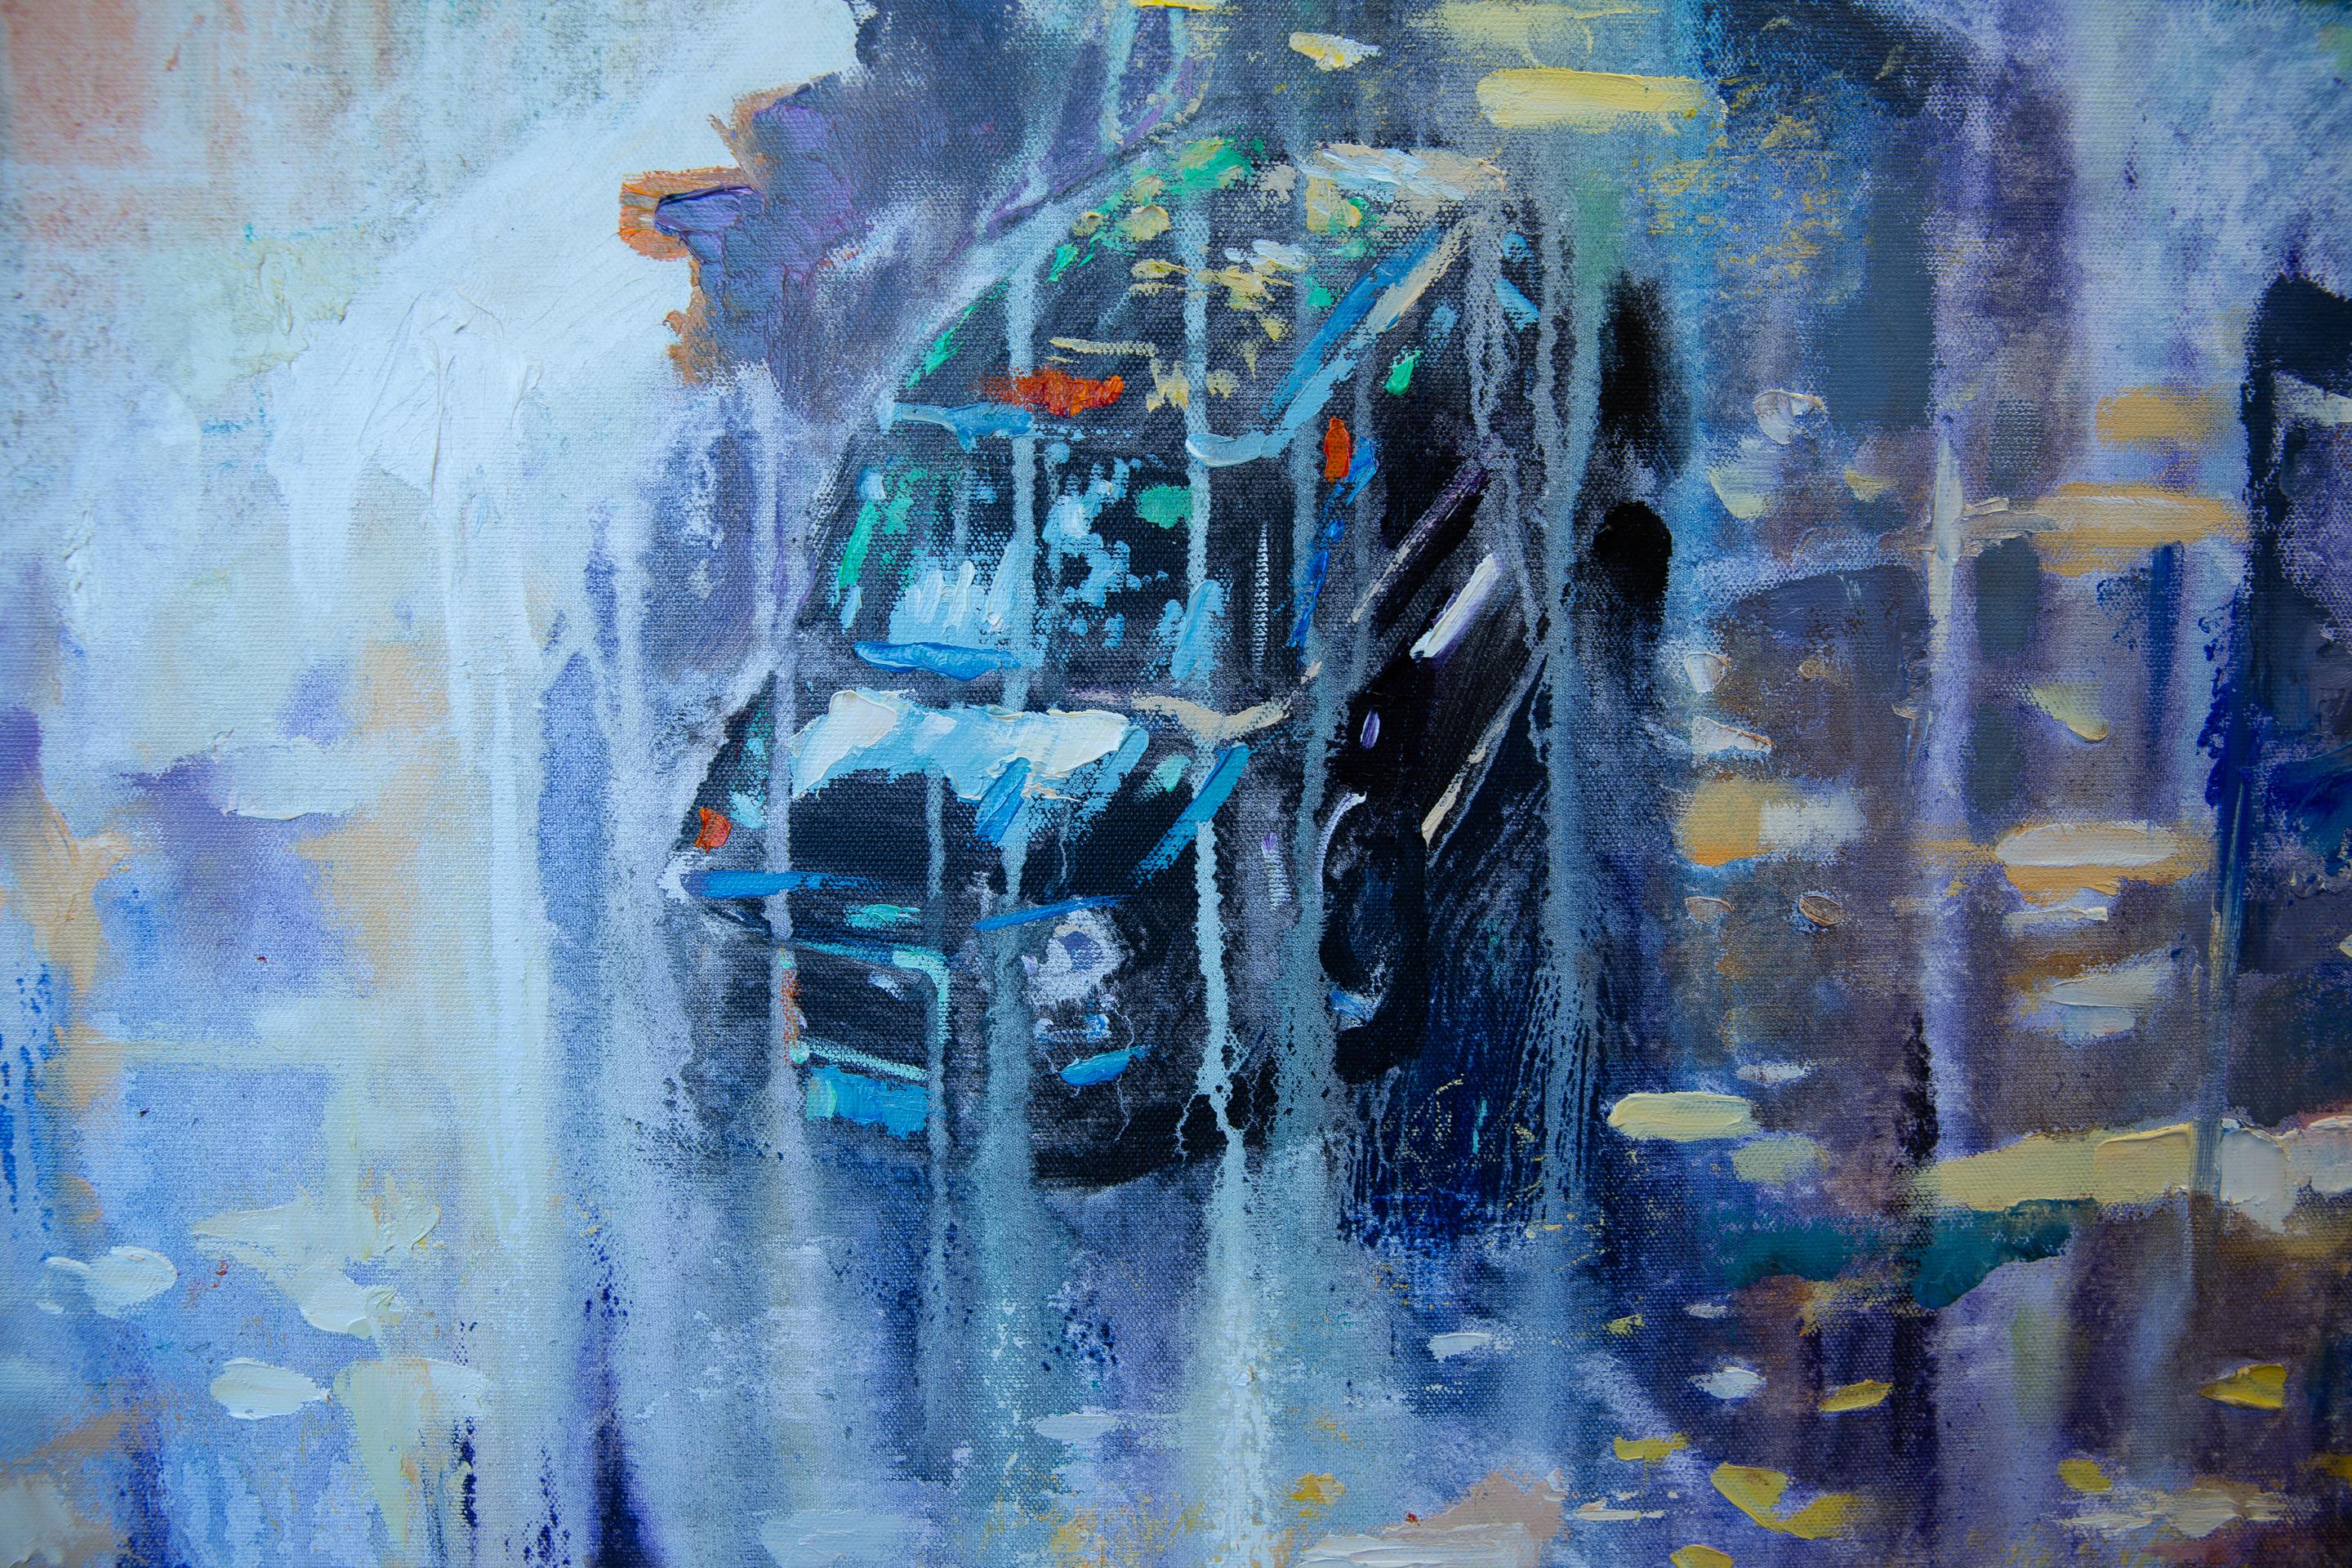 London Dream - Blue Abstract Painting by Anna Shesterikova